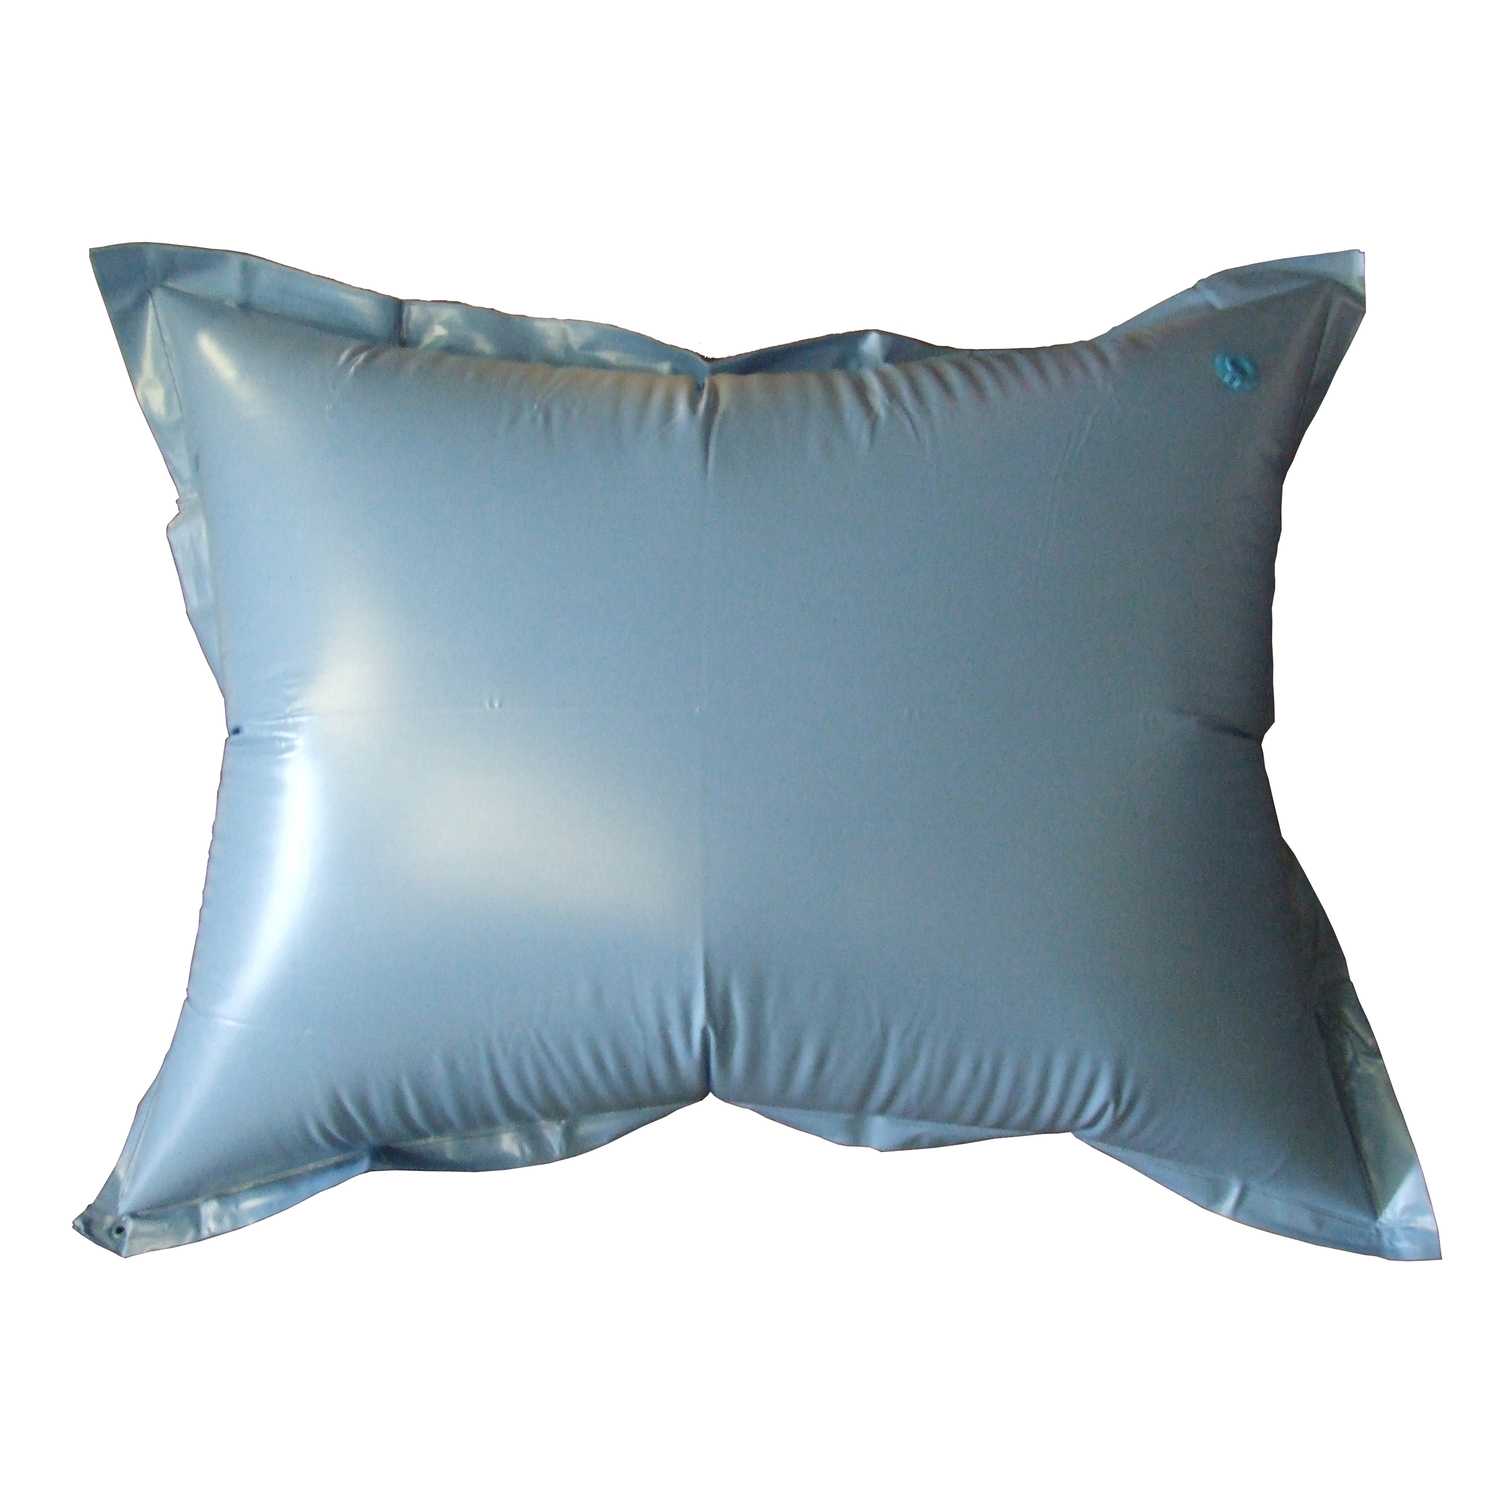 Jed Pool Cover Air Pillow 5 In W X 4 In L Ace Hardware